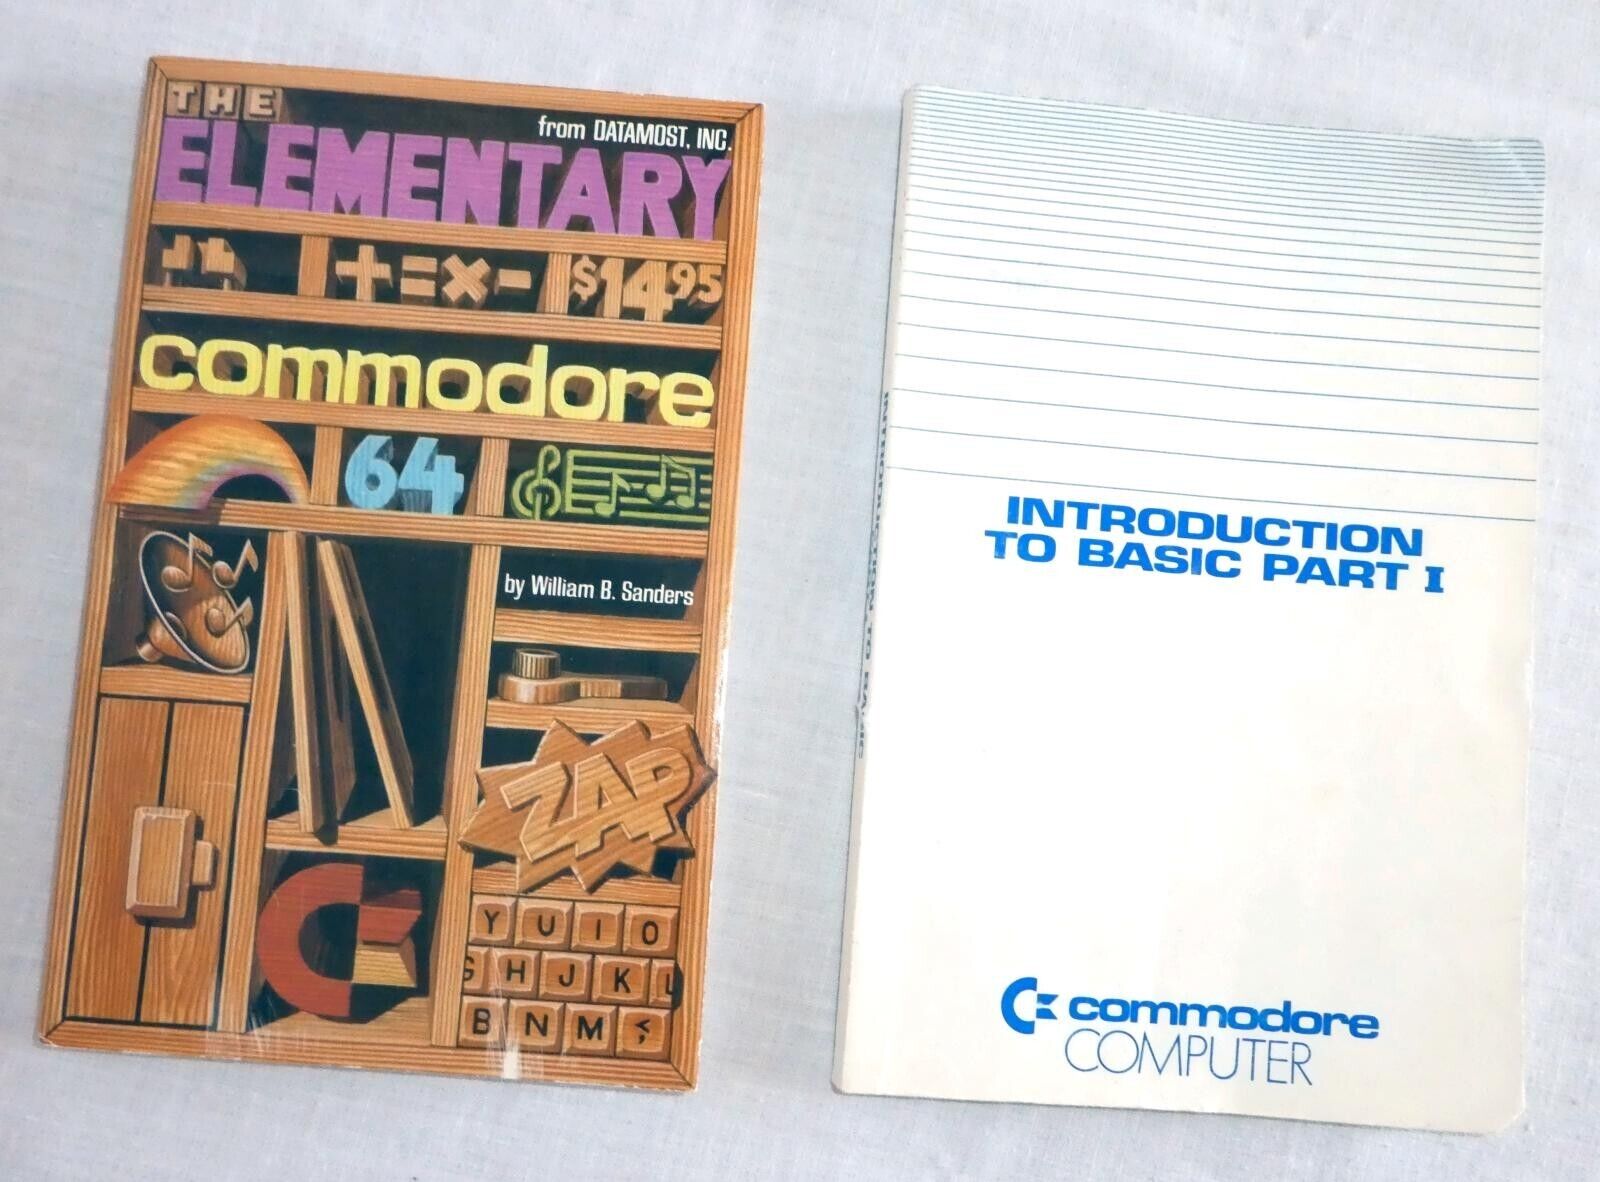 Two Commodore Books: The Elementary Commodore 64 & Introduction to Basic Part 1